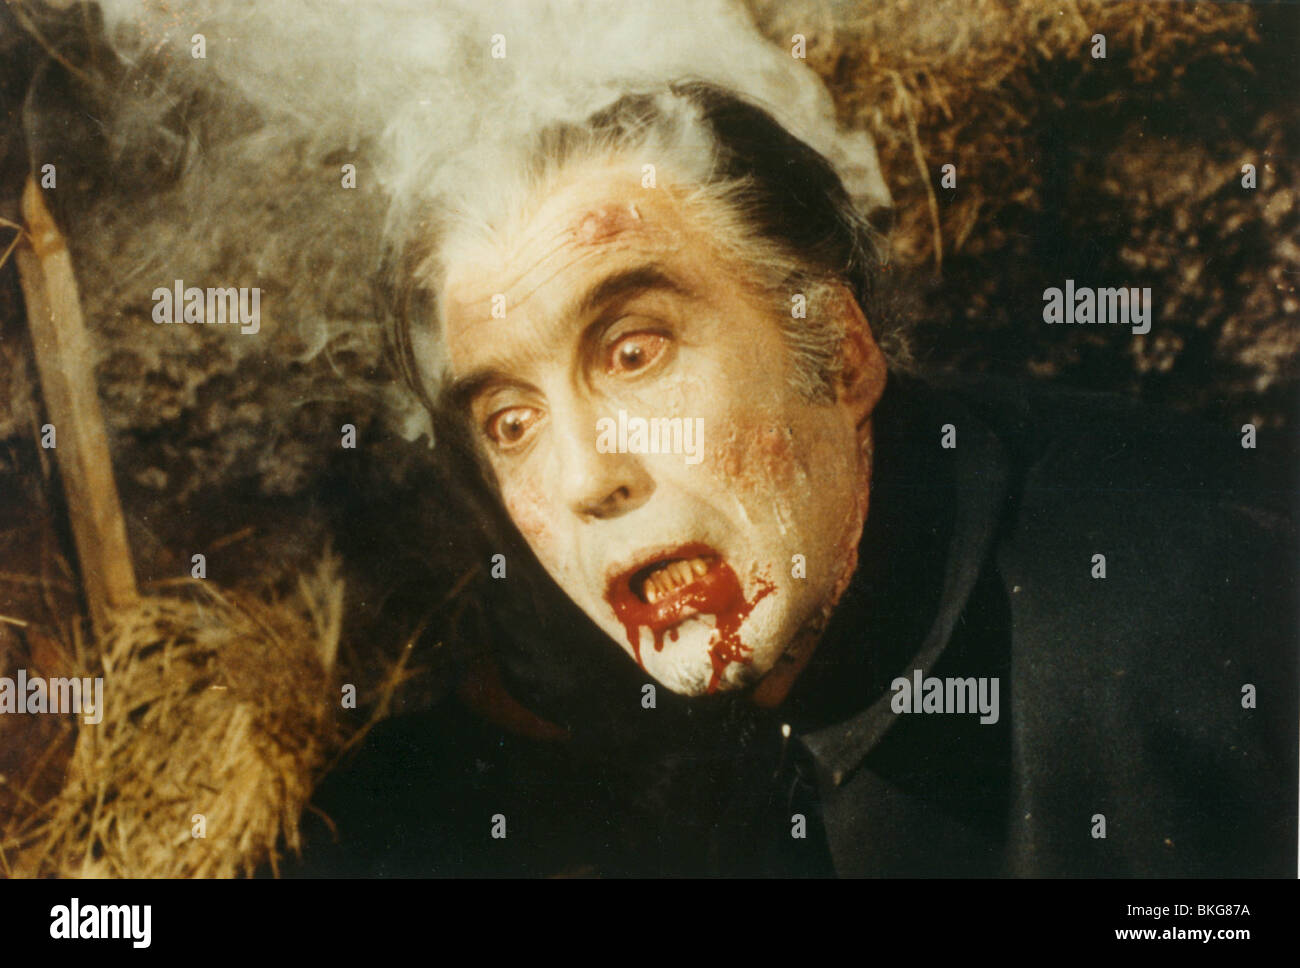 DRACULA A.D. 1972 (1972) CHRISTOPHER LEE DR72 001CP Stock Photo